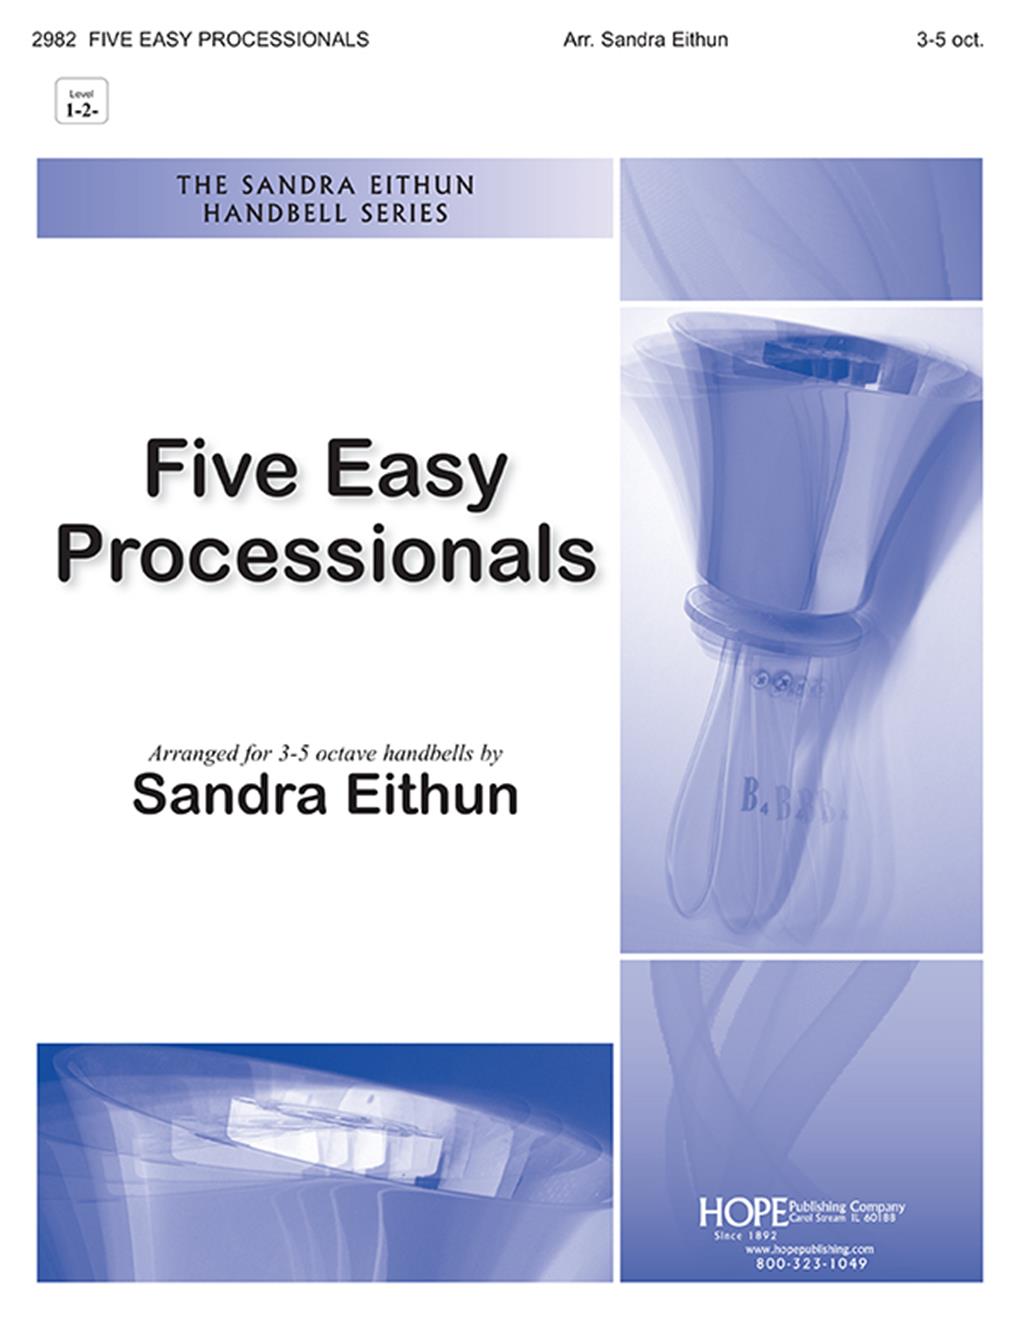 FIVE EASY PROCESSIONALS - 3-5 Oct. Cover Image